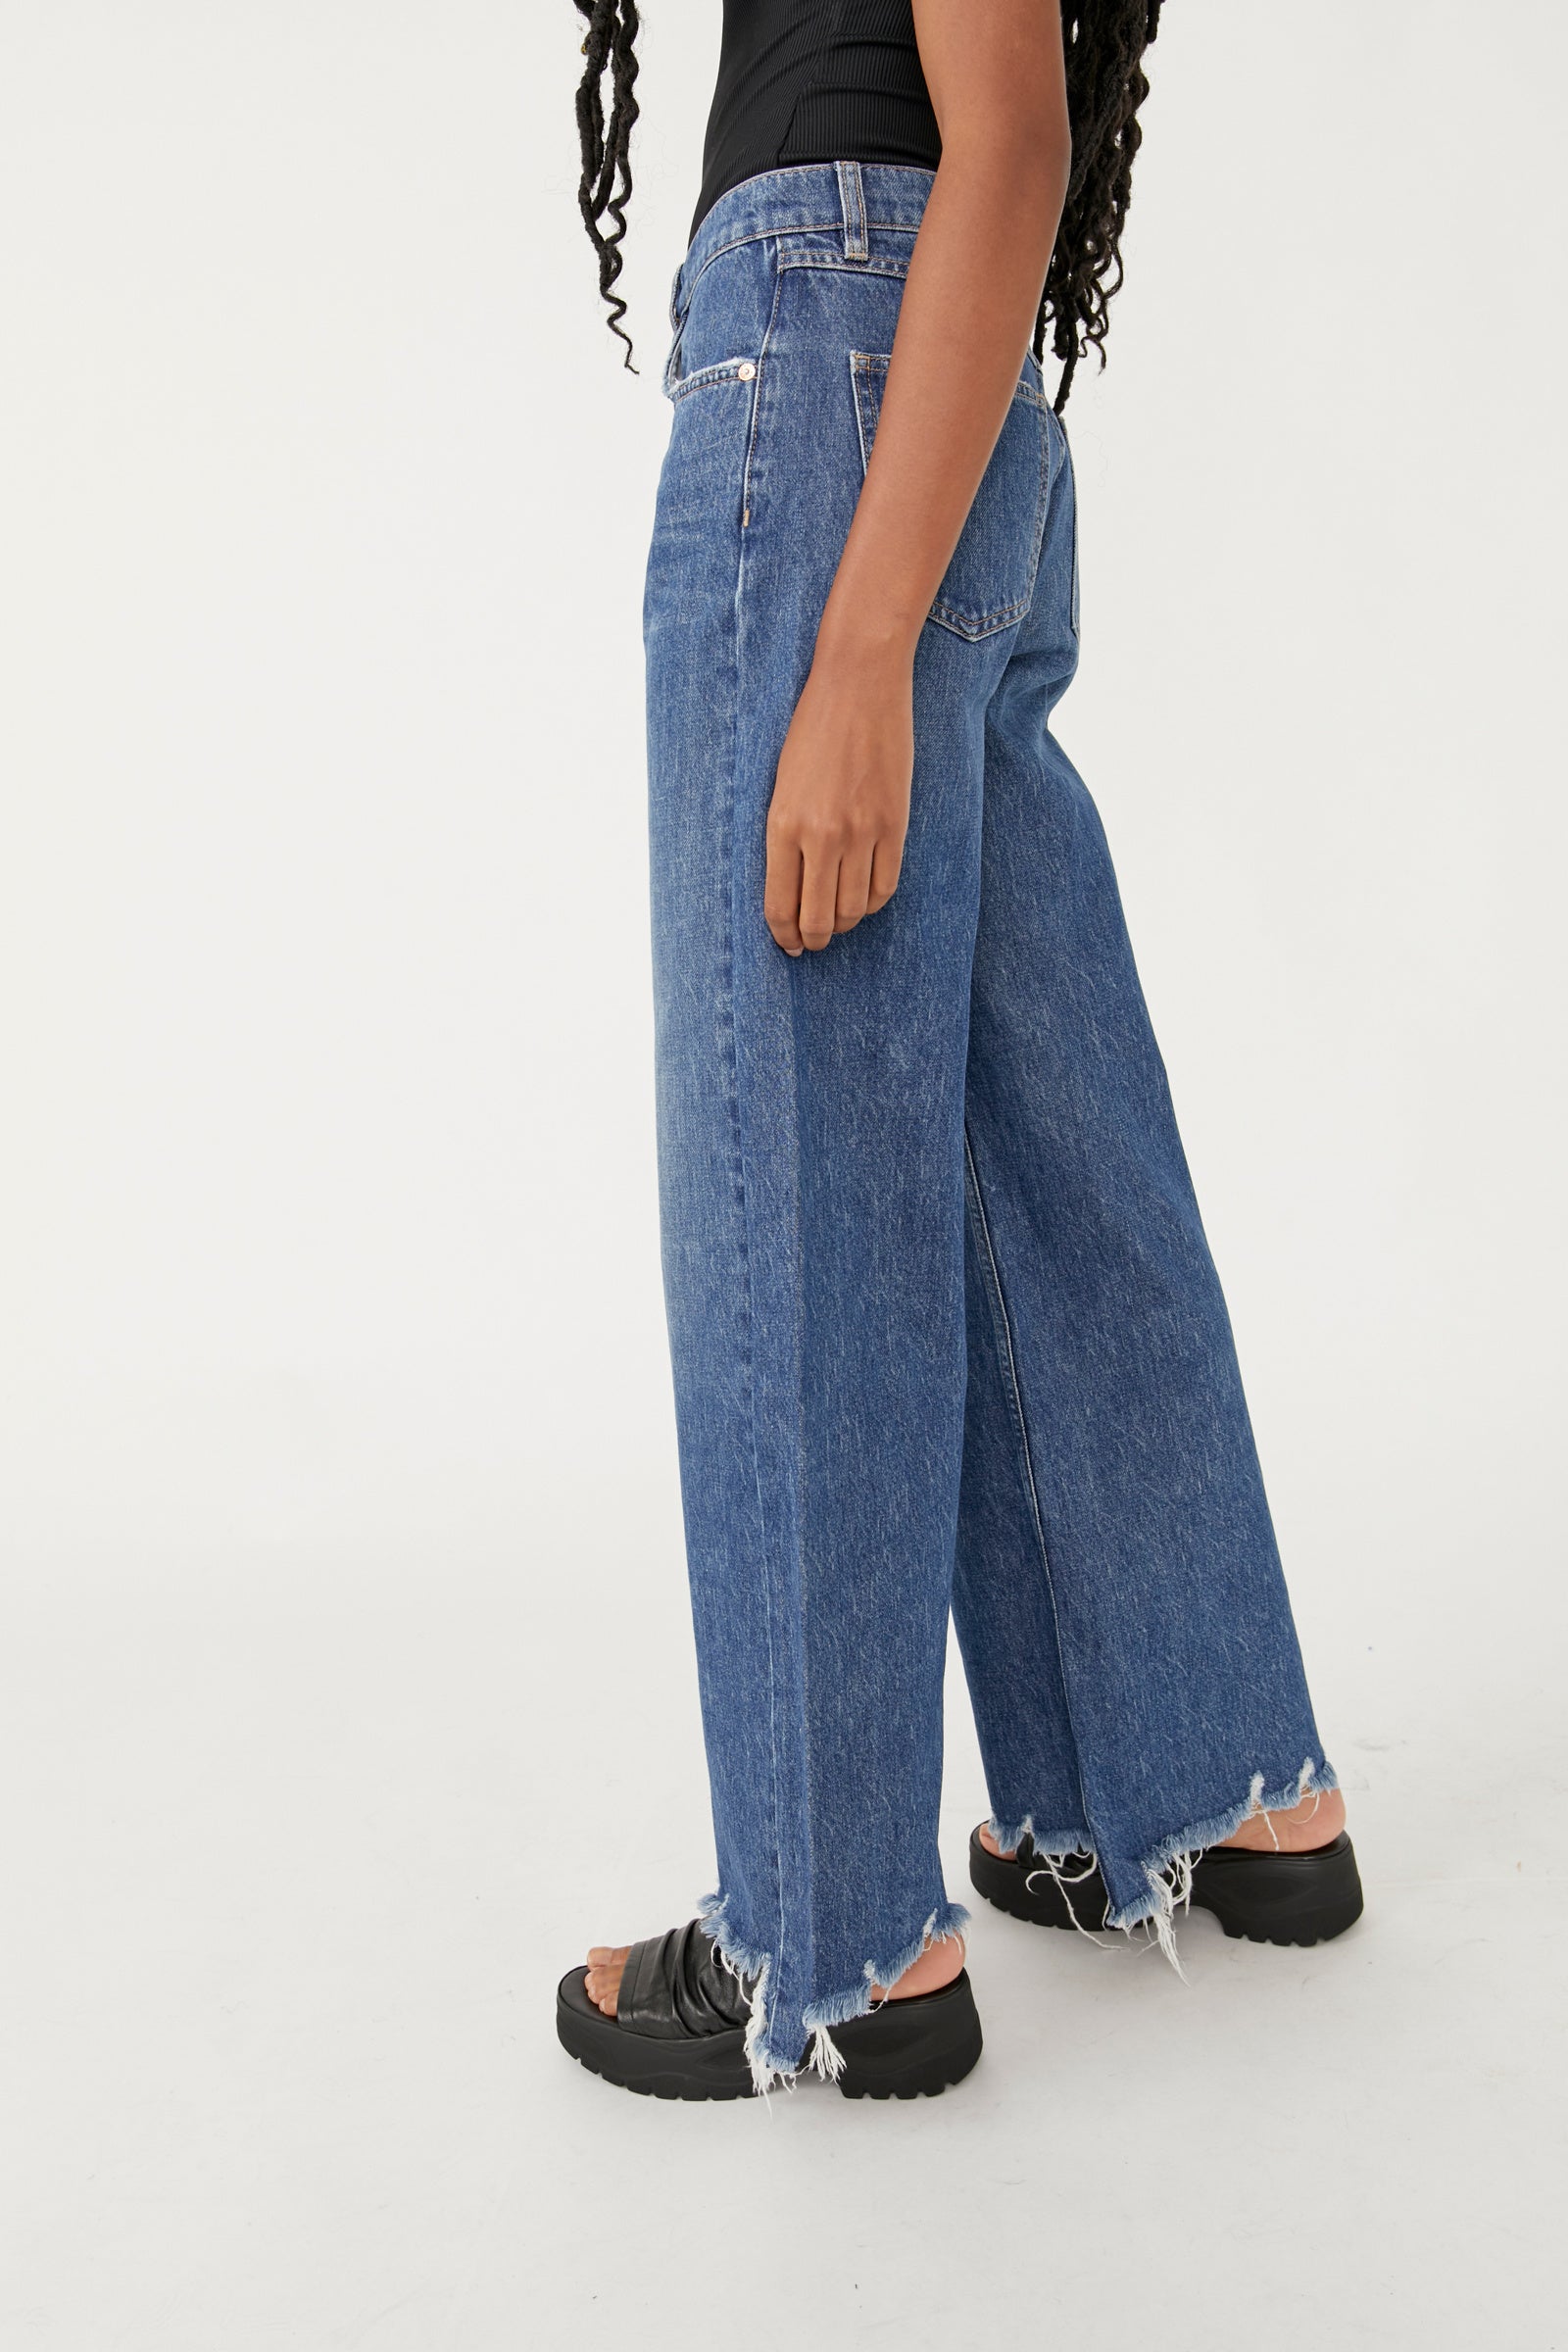 Straight Up Baggy Jeans Free People